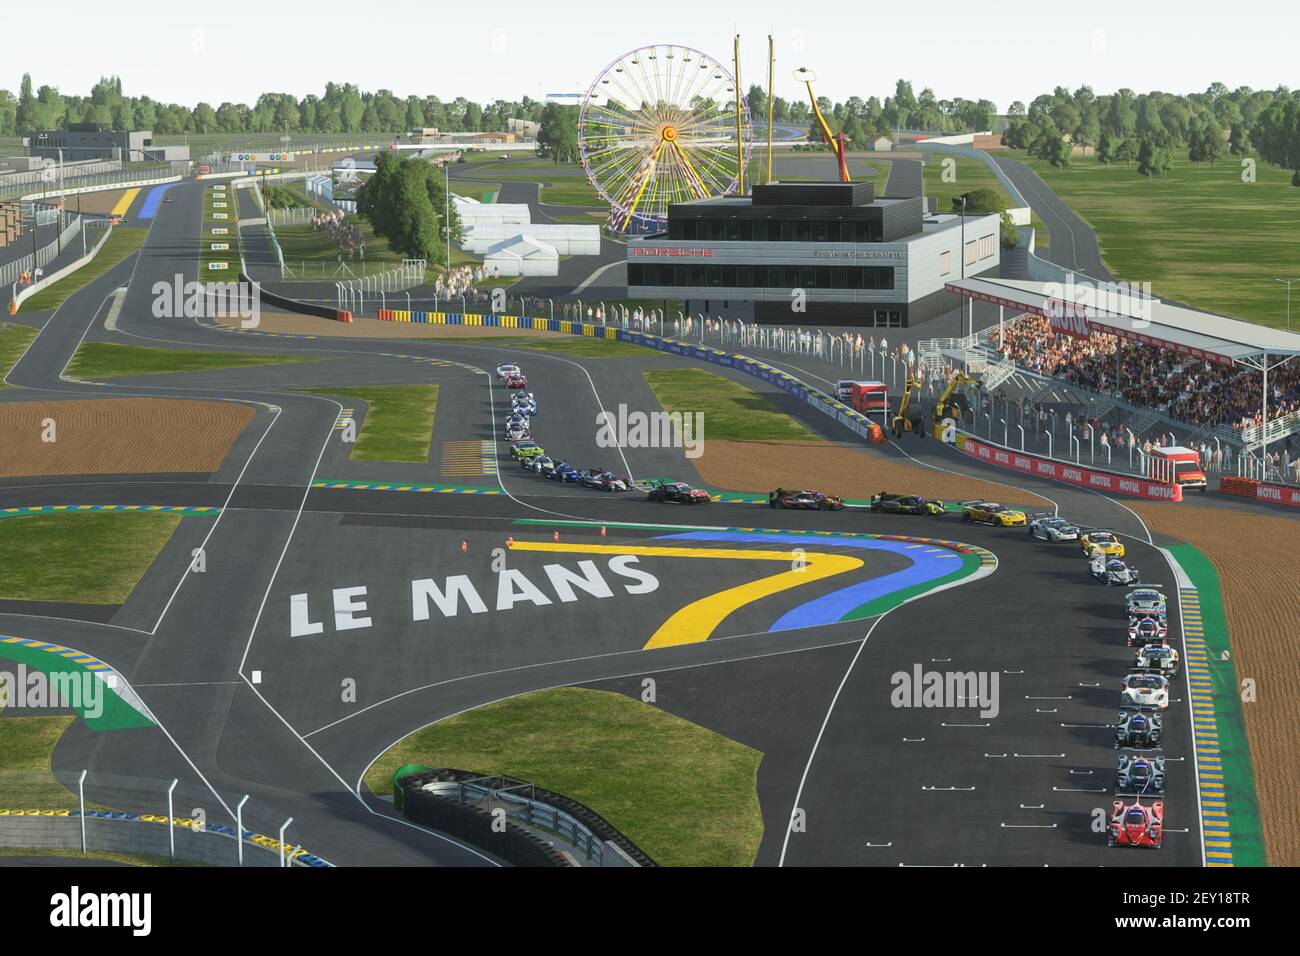 Ambiance the Red flag due to a server problem during the 24 Hours of Le Mans 24 Heures Mans Virtuelles, sim racing, from June 12 to 14, 2020 run